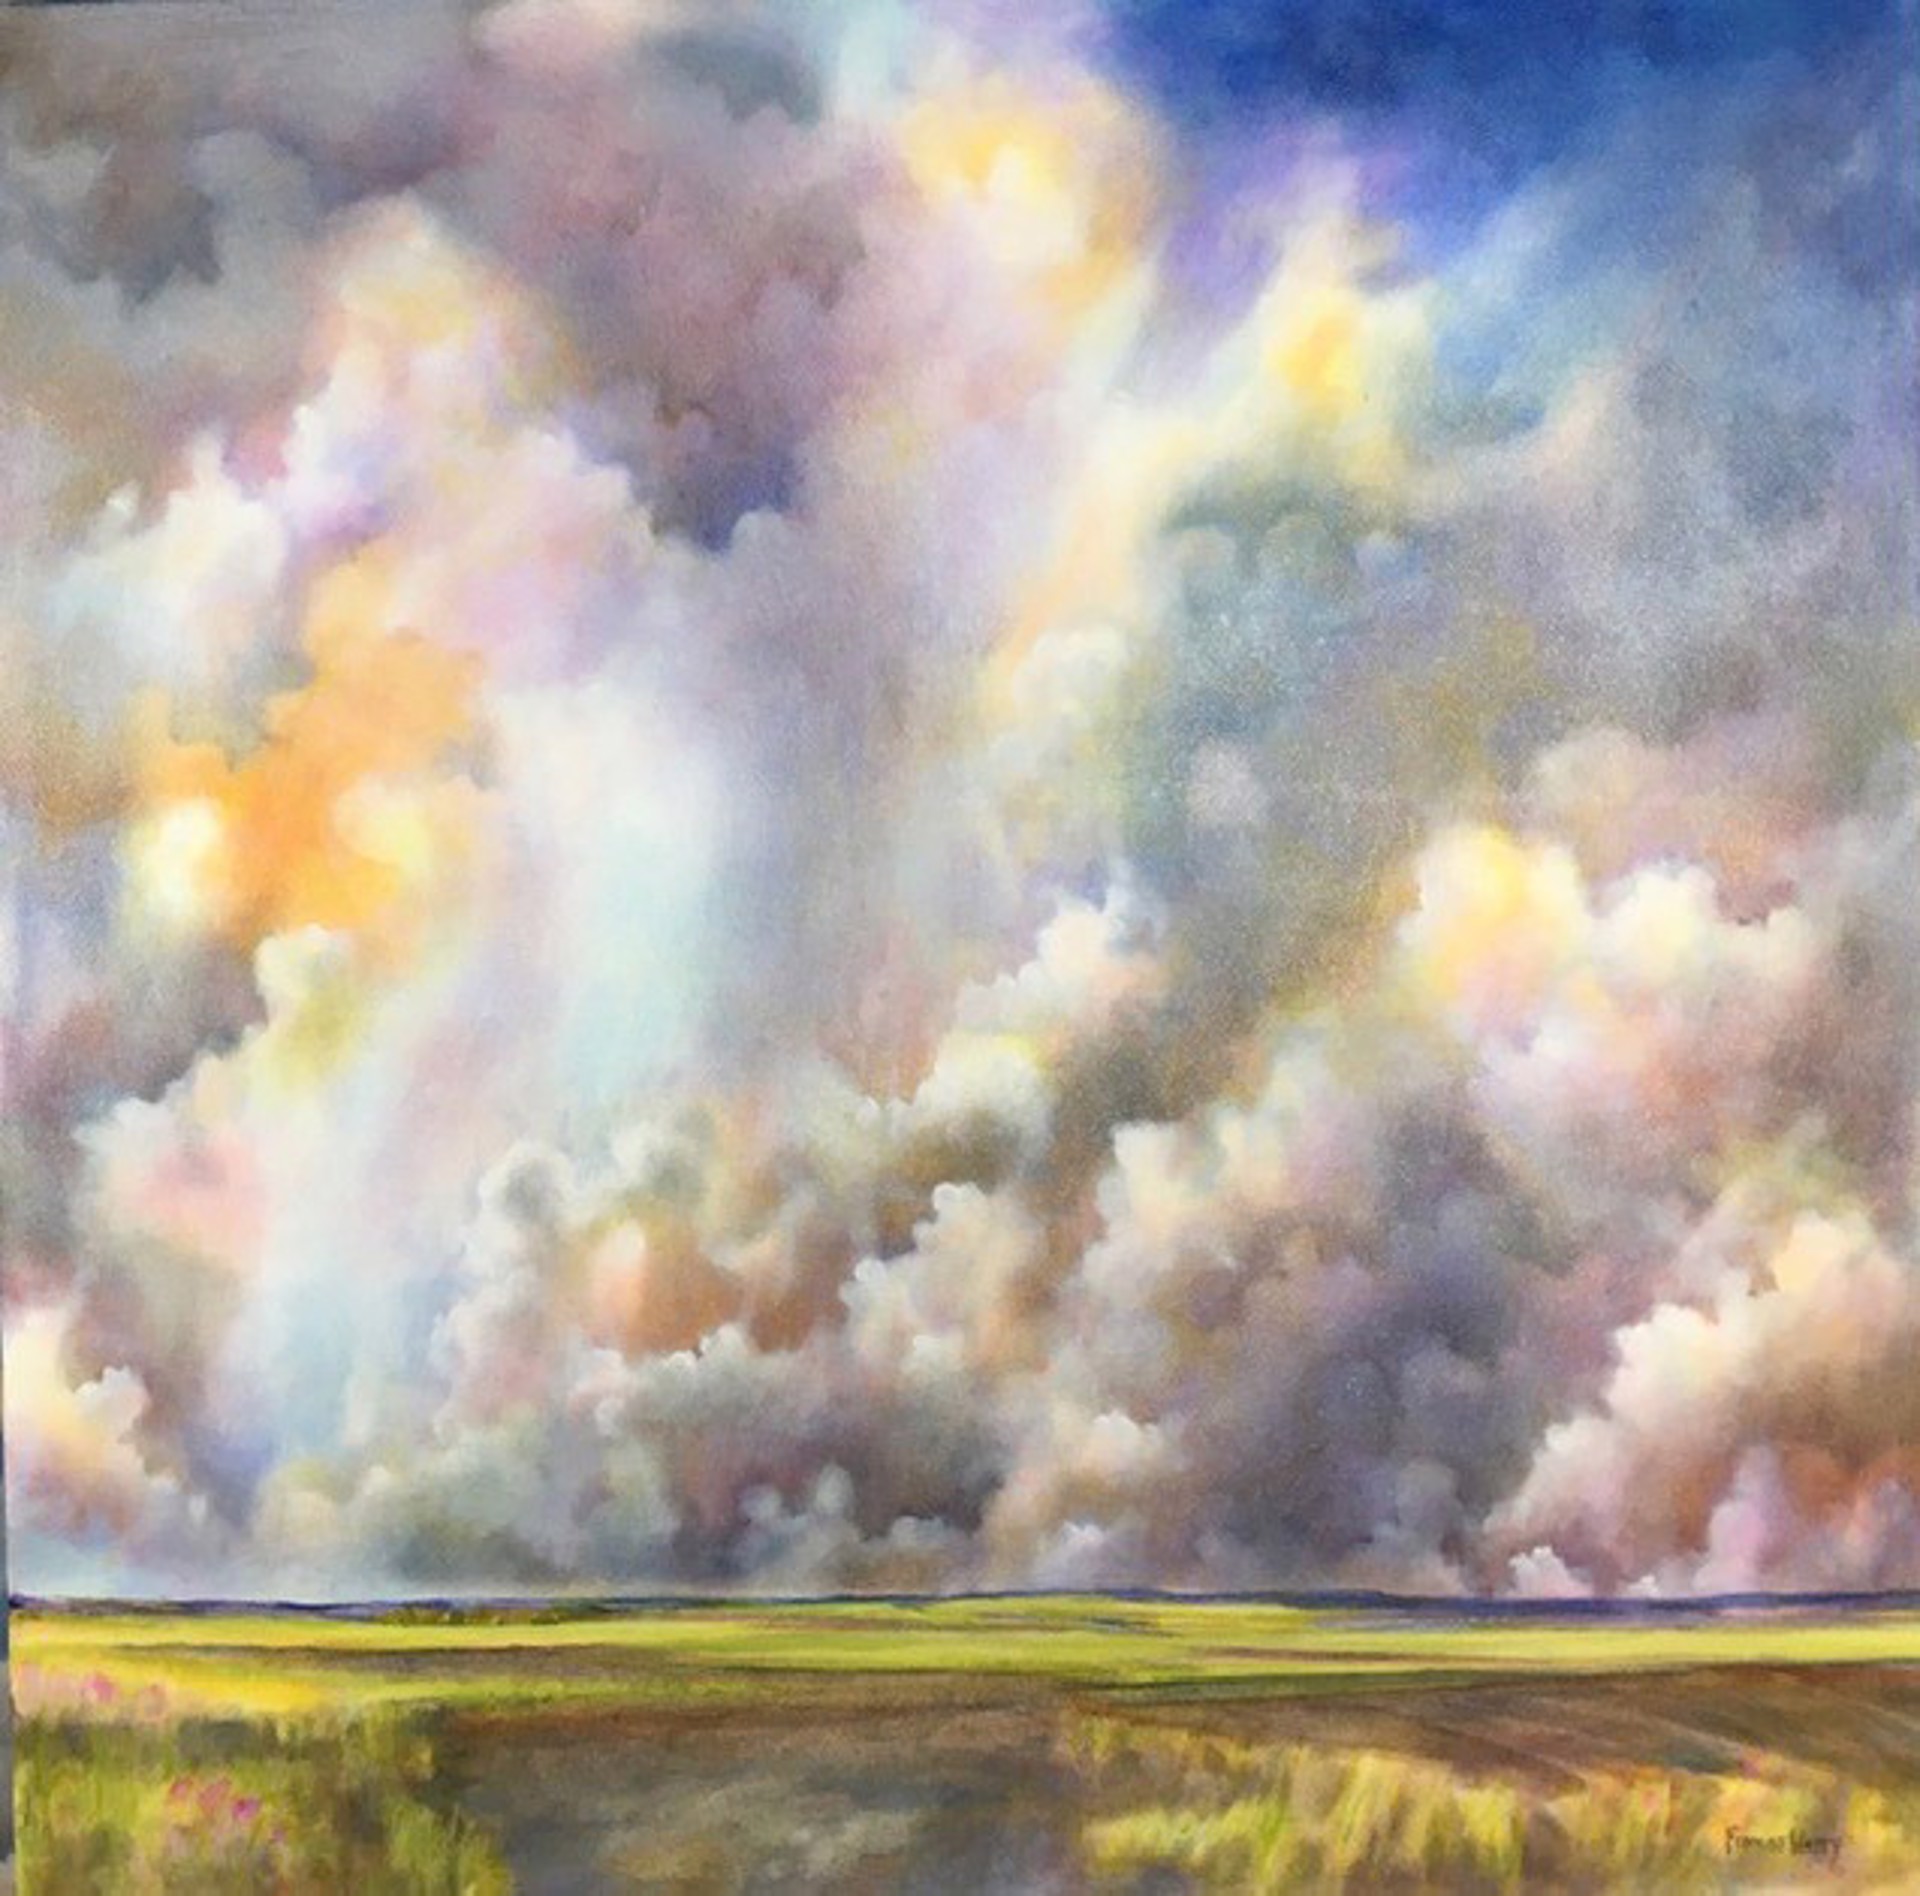 Shifting Winds Over Fallow Field by Frances Werry